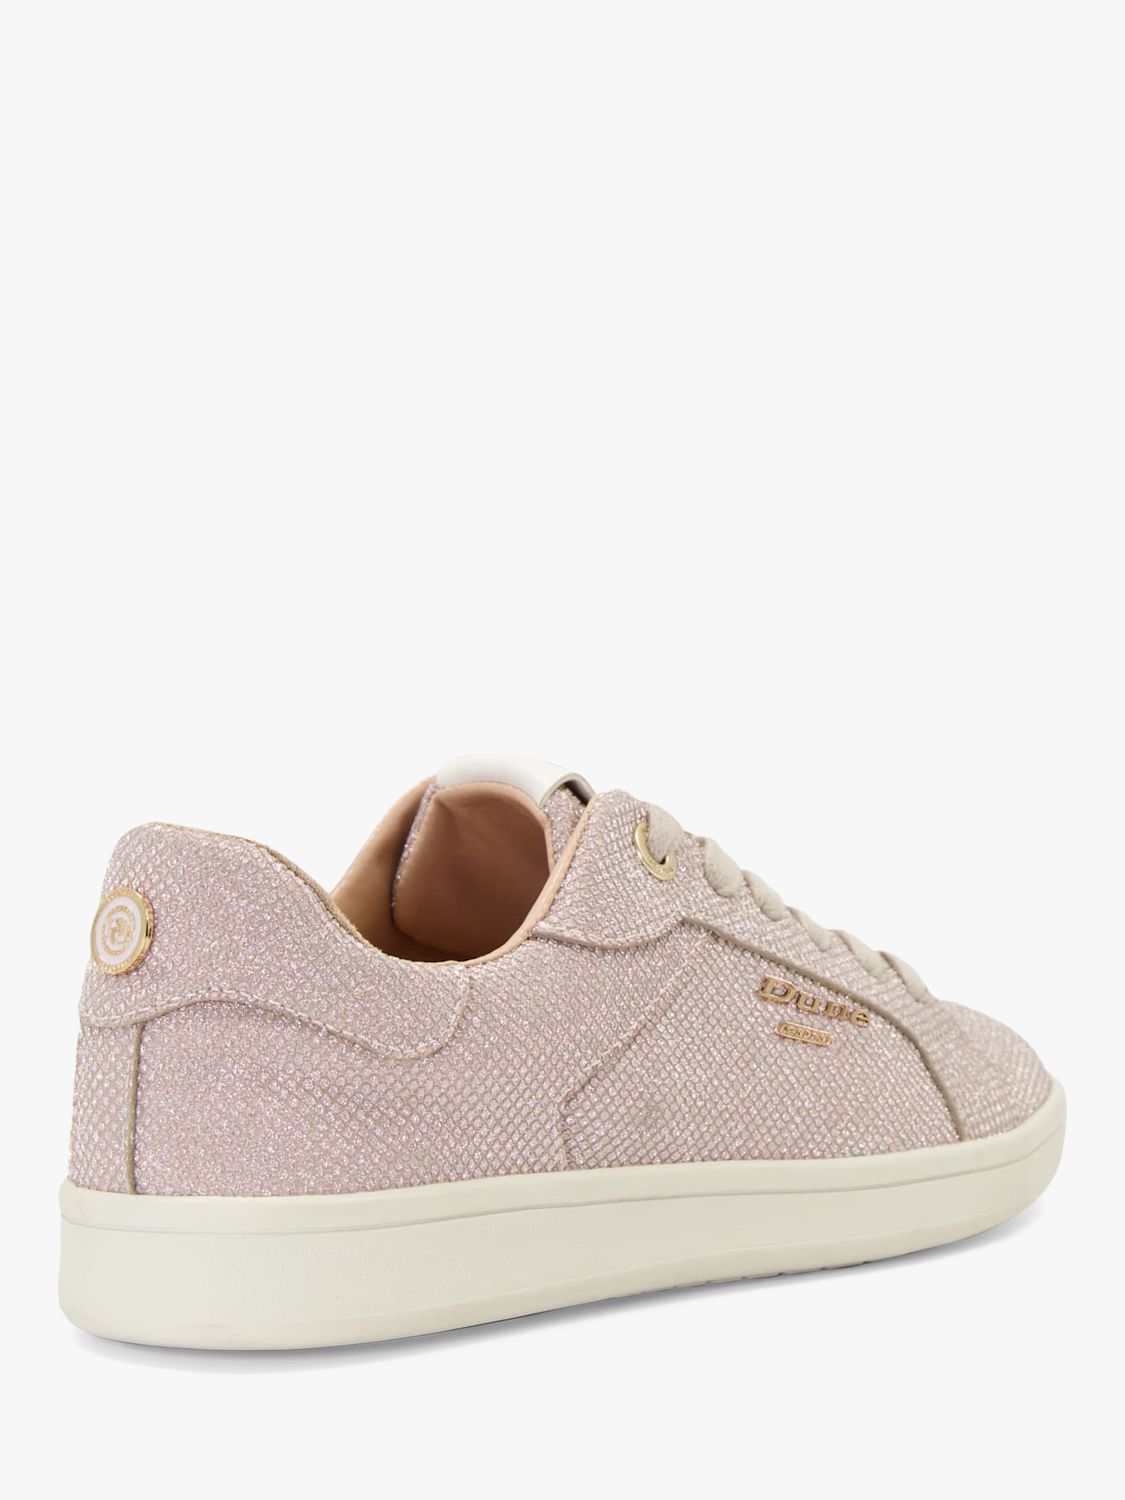 Buy Dune Enduring Trainers, Rose Gold Online at johnlewis.com